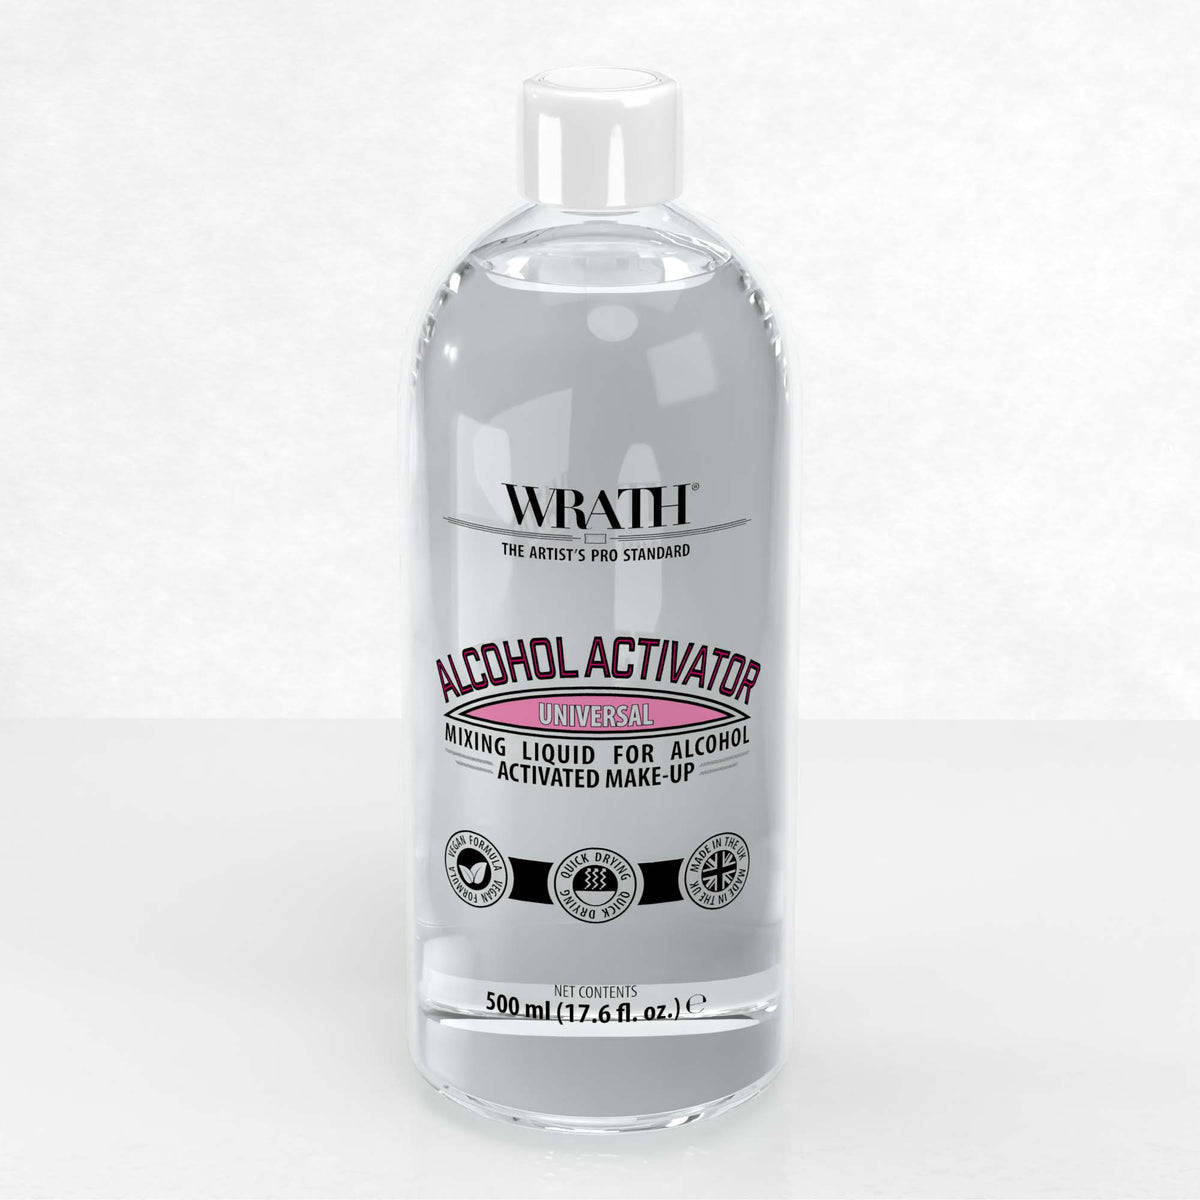 WRATH Alcohol Activator - Mixing Liquid for AA Make-up